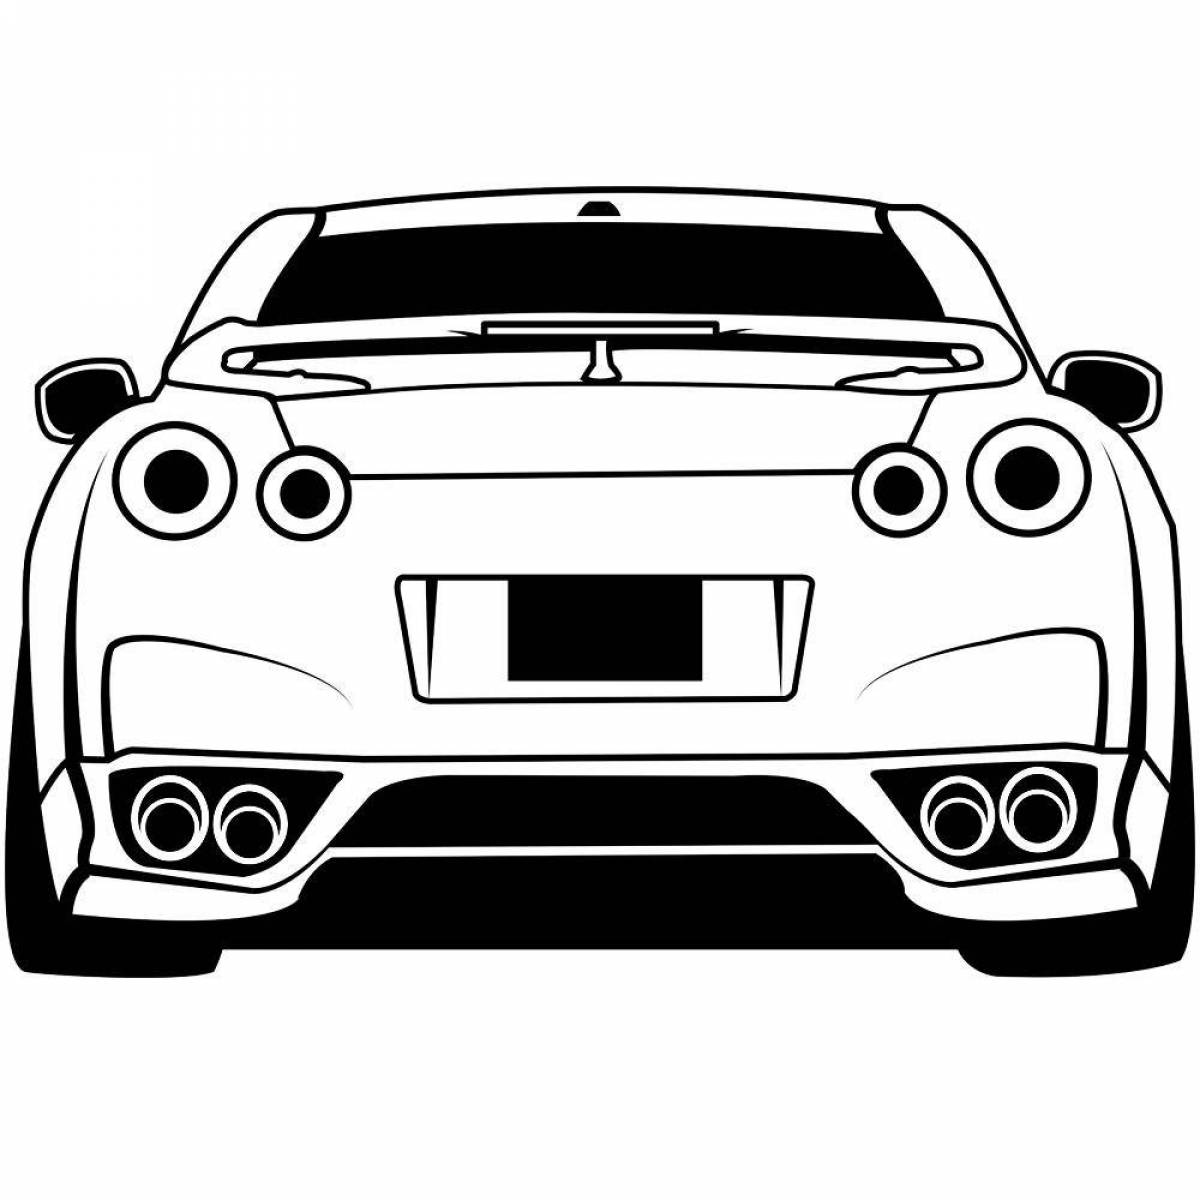 Radiant gtr coloring page